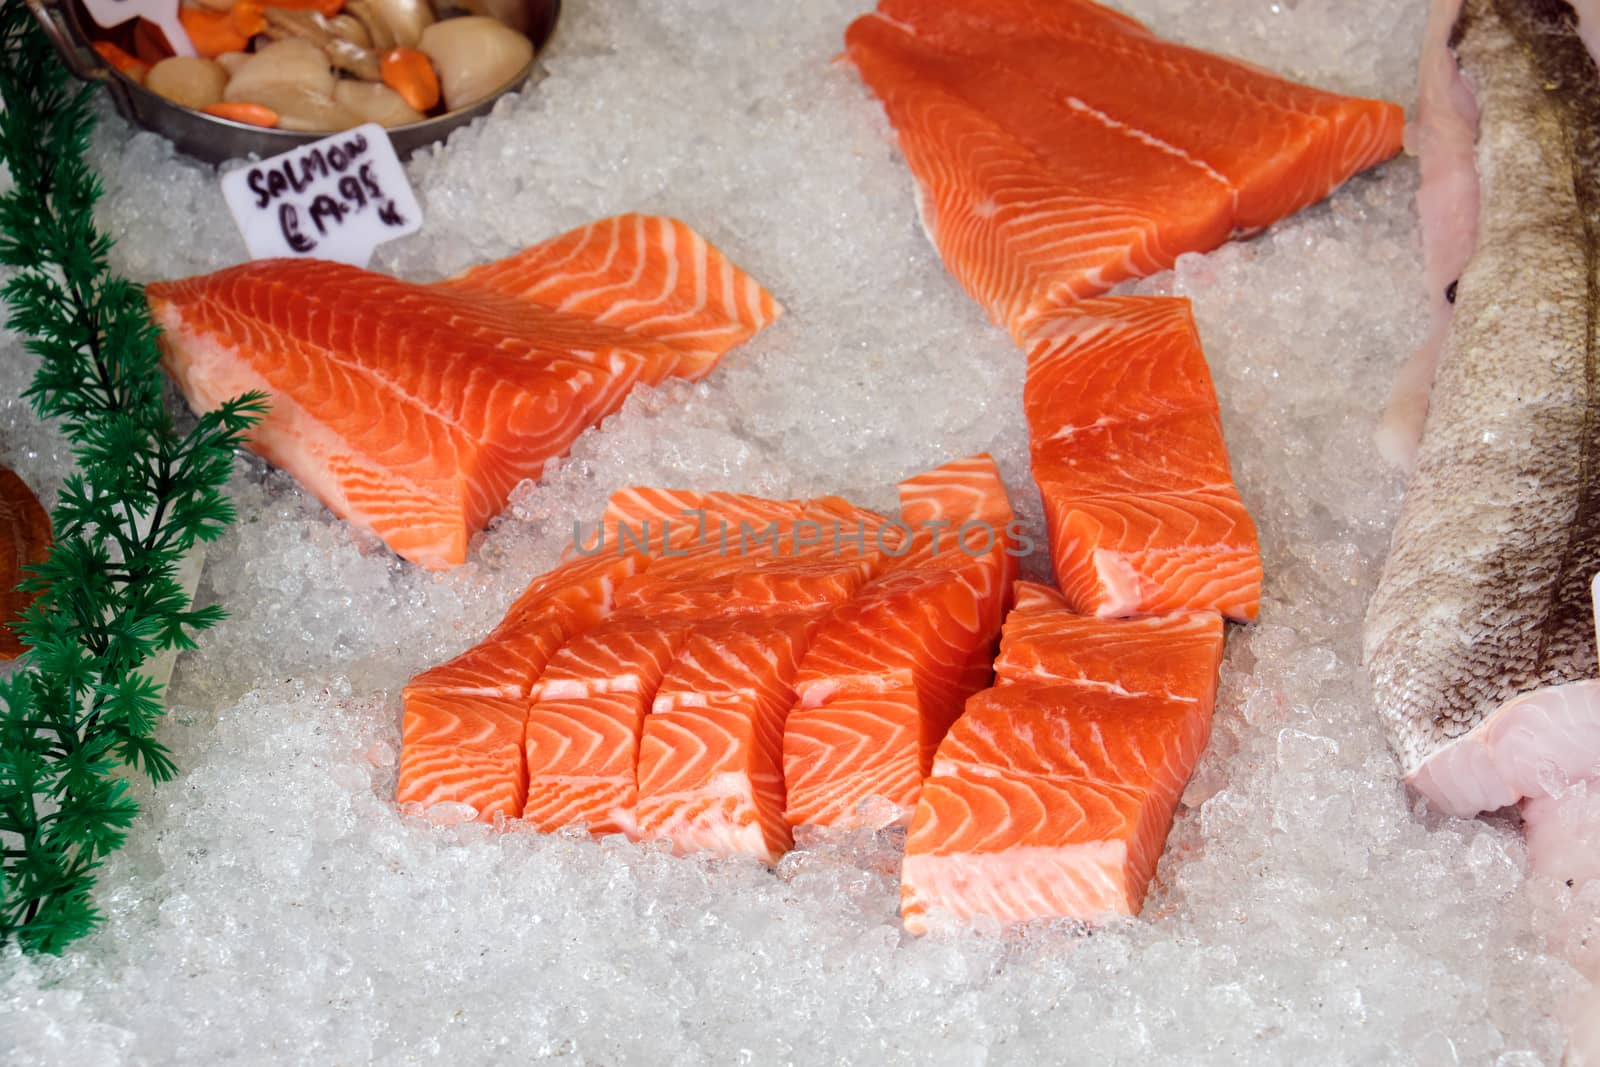 Fresh salmon fillet for sale at a market